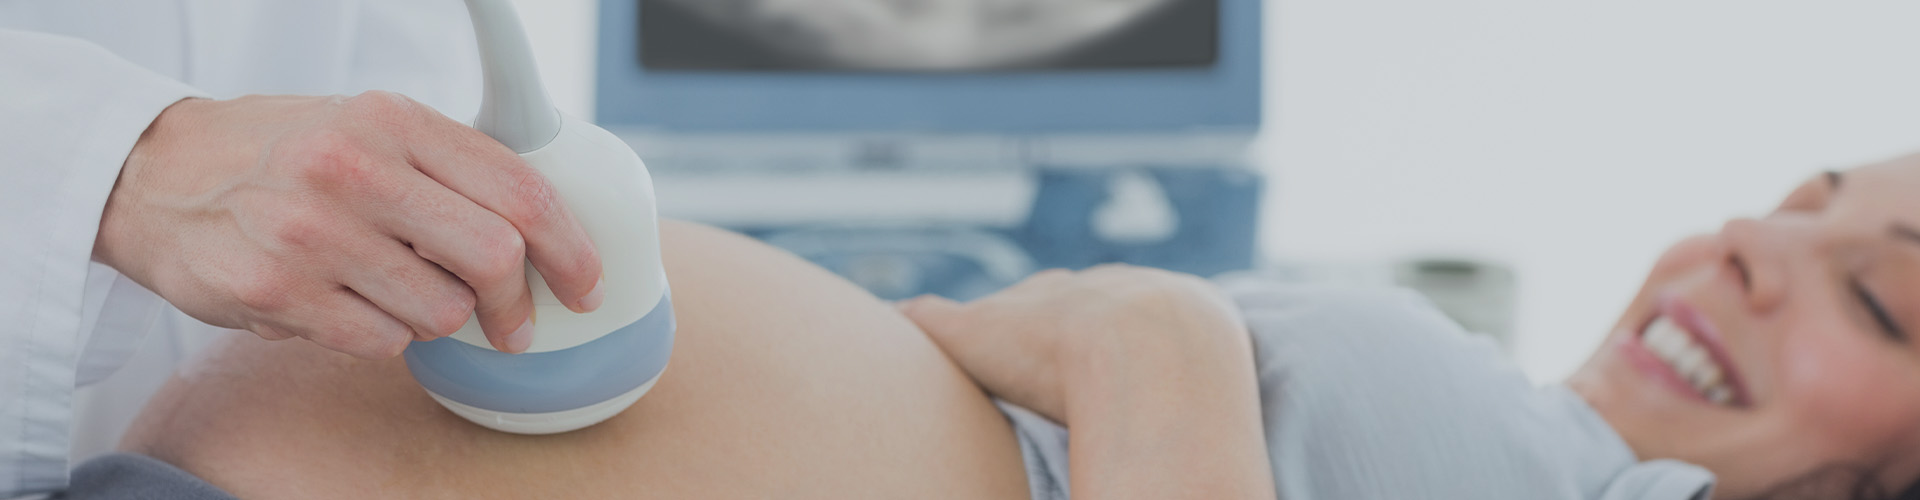 Prairie Point OBGYN provides convenient, high-quality ultrasounds in our office.